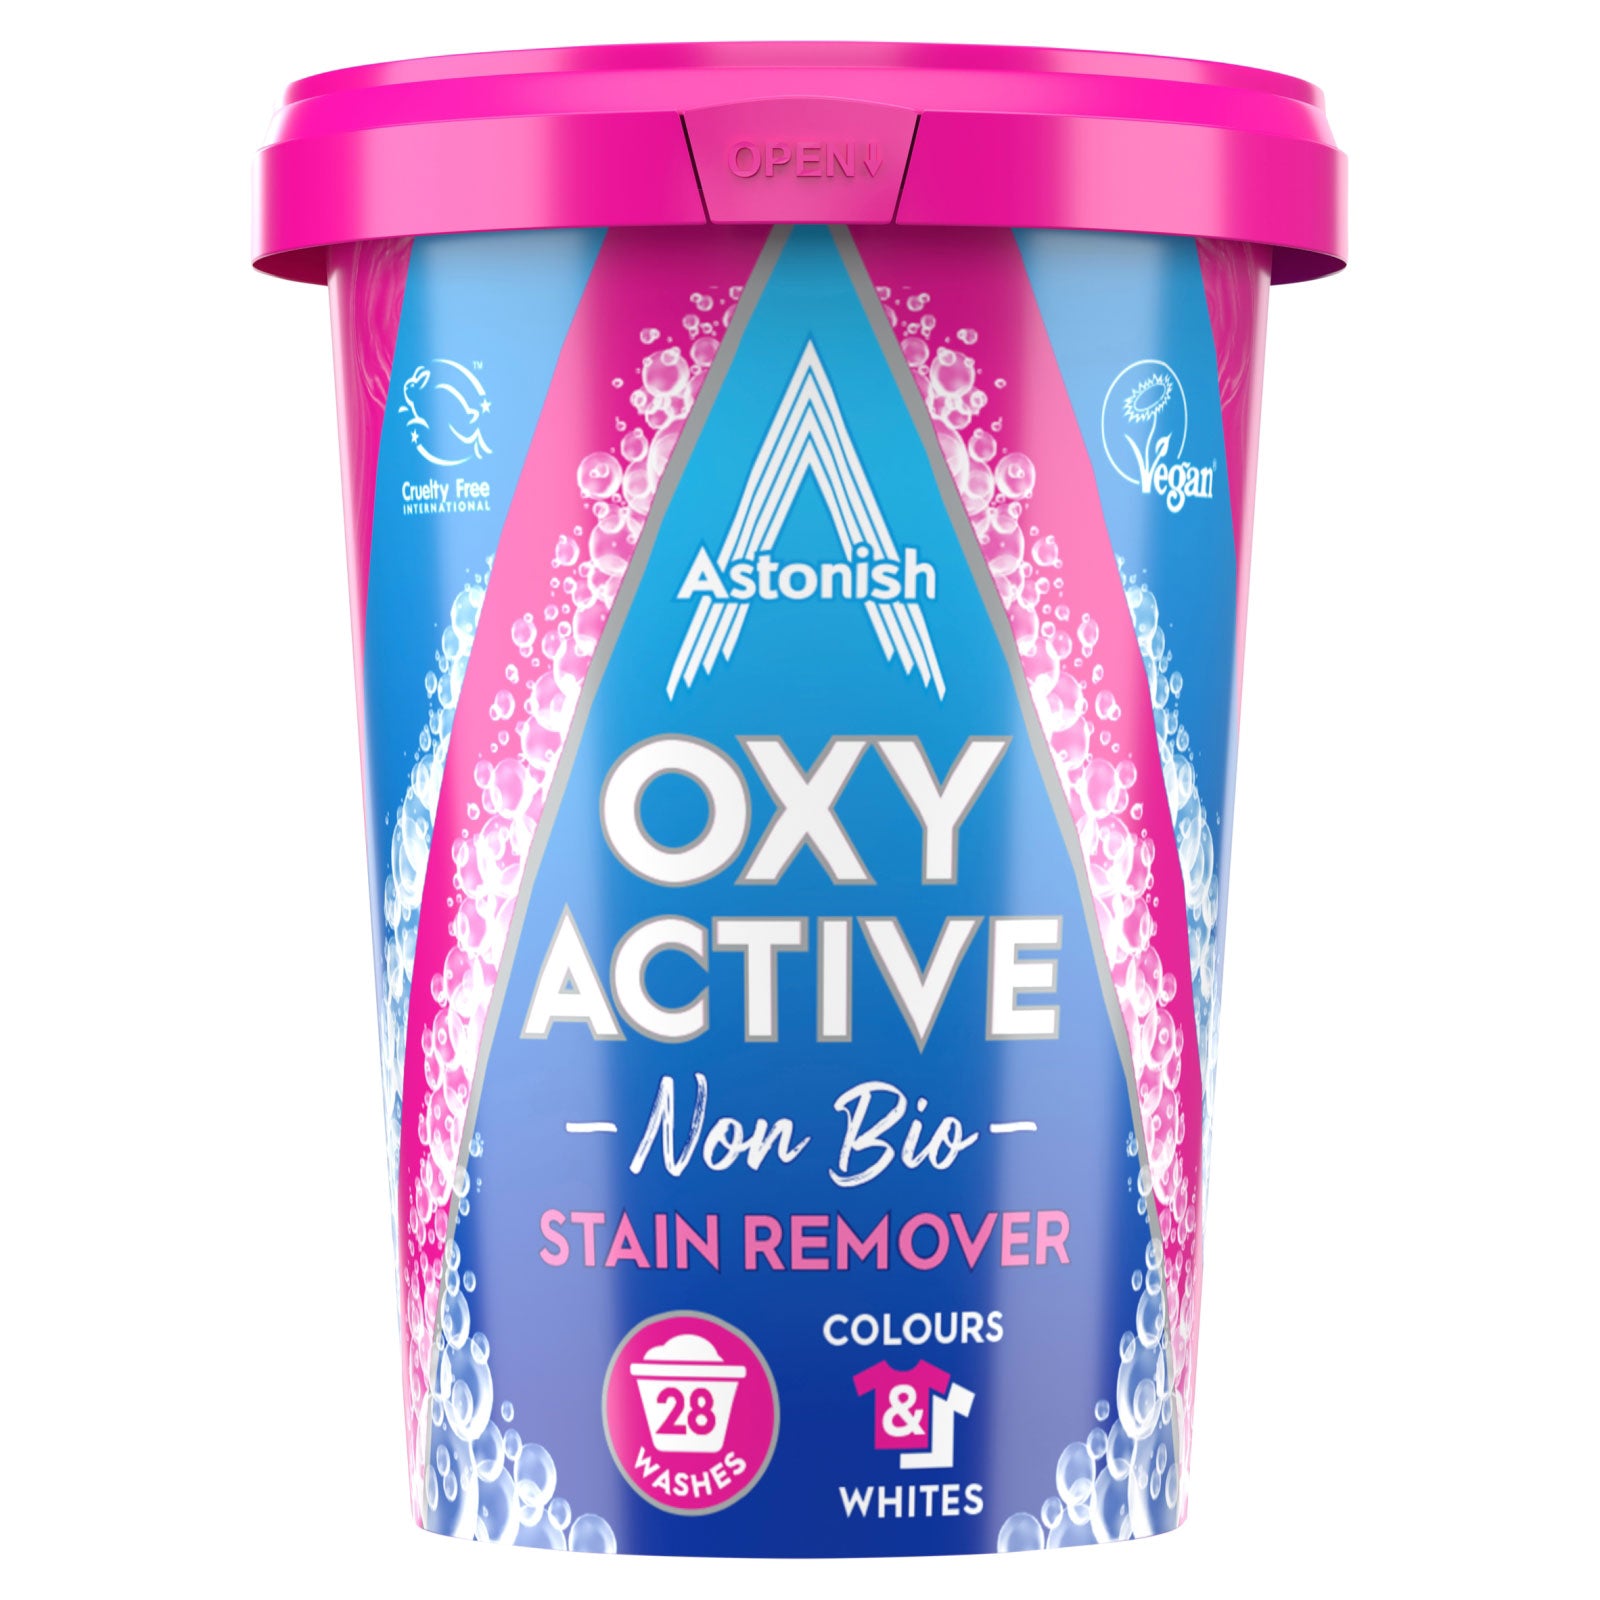 Astonish Oxy Active Stain Remover 625G